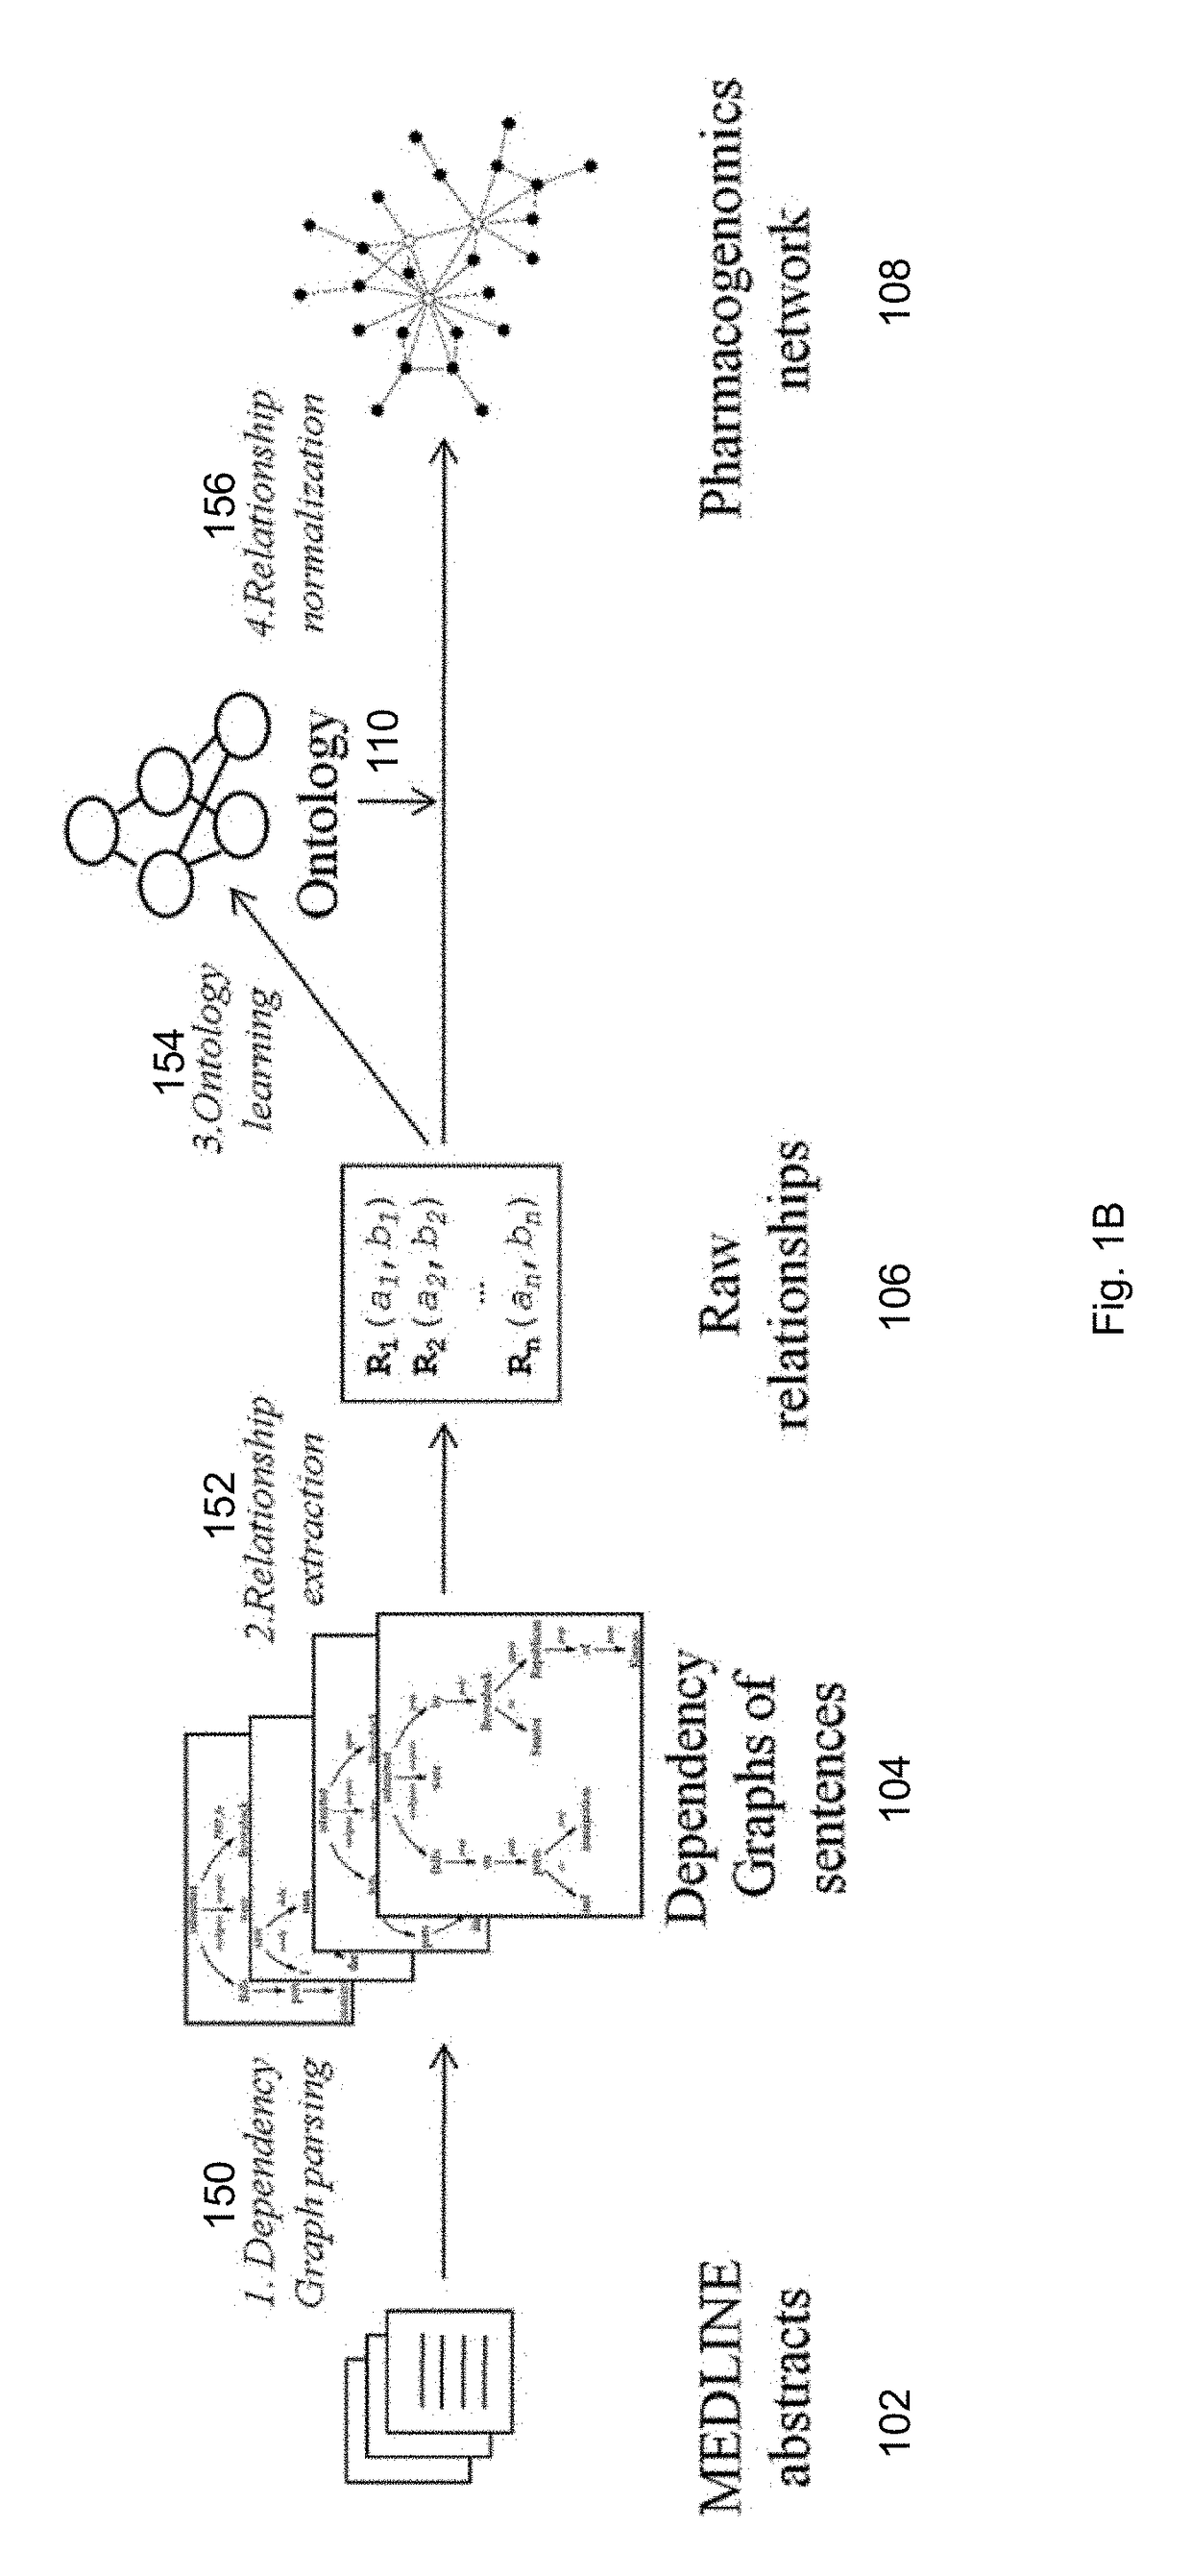 Method and system for extraction and normalization of relationships via ontology induction